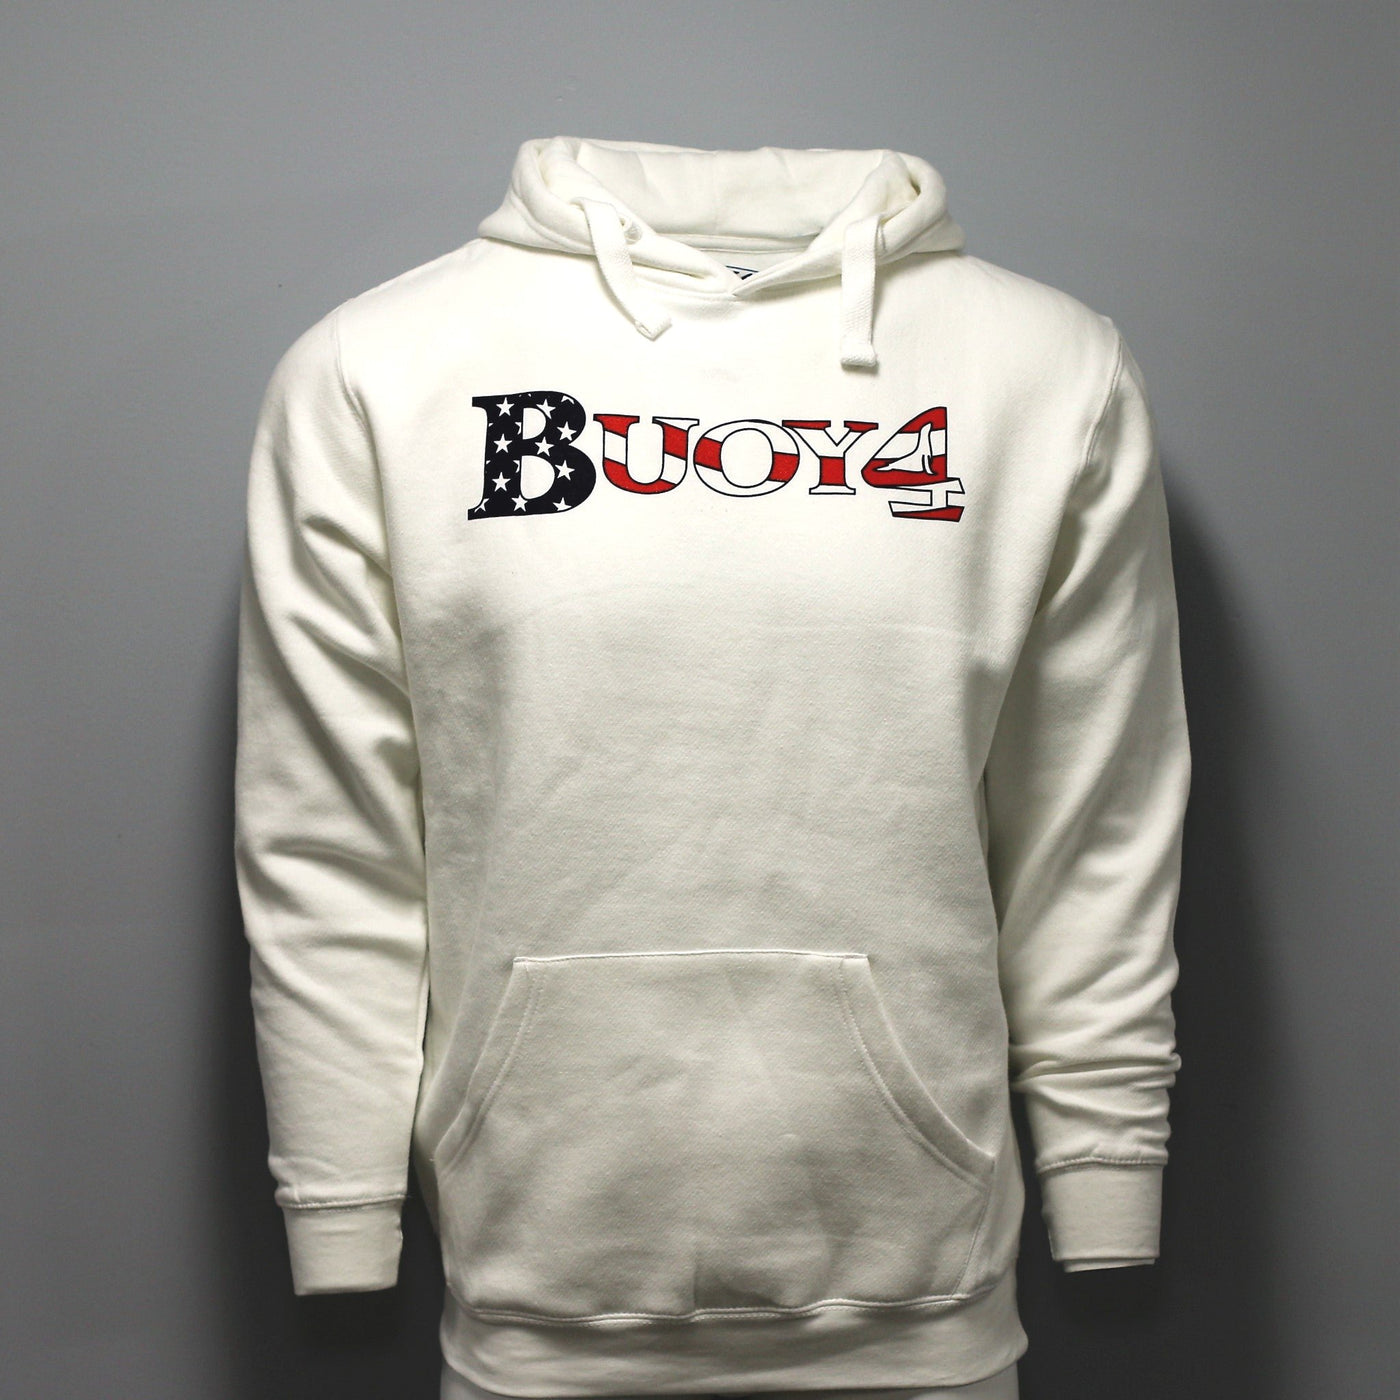 Adult White - The Patriot - Pullover